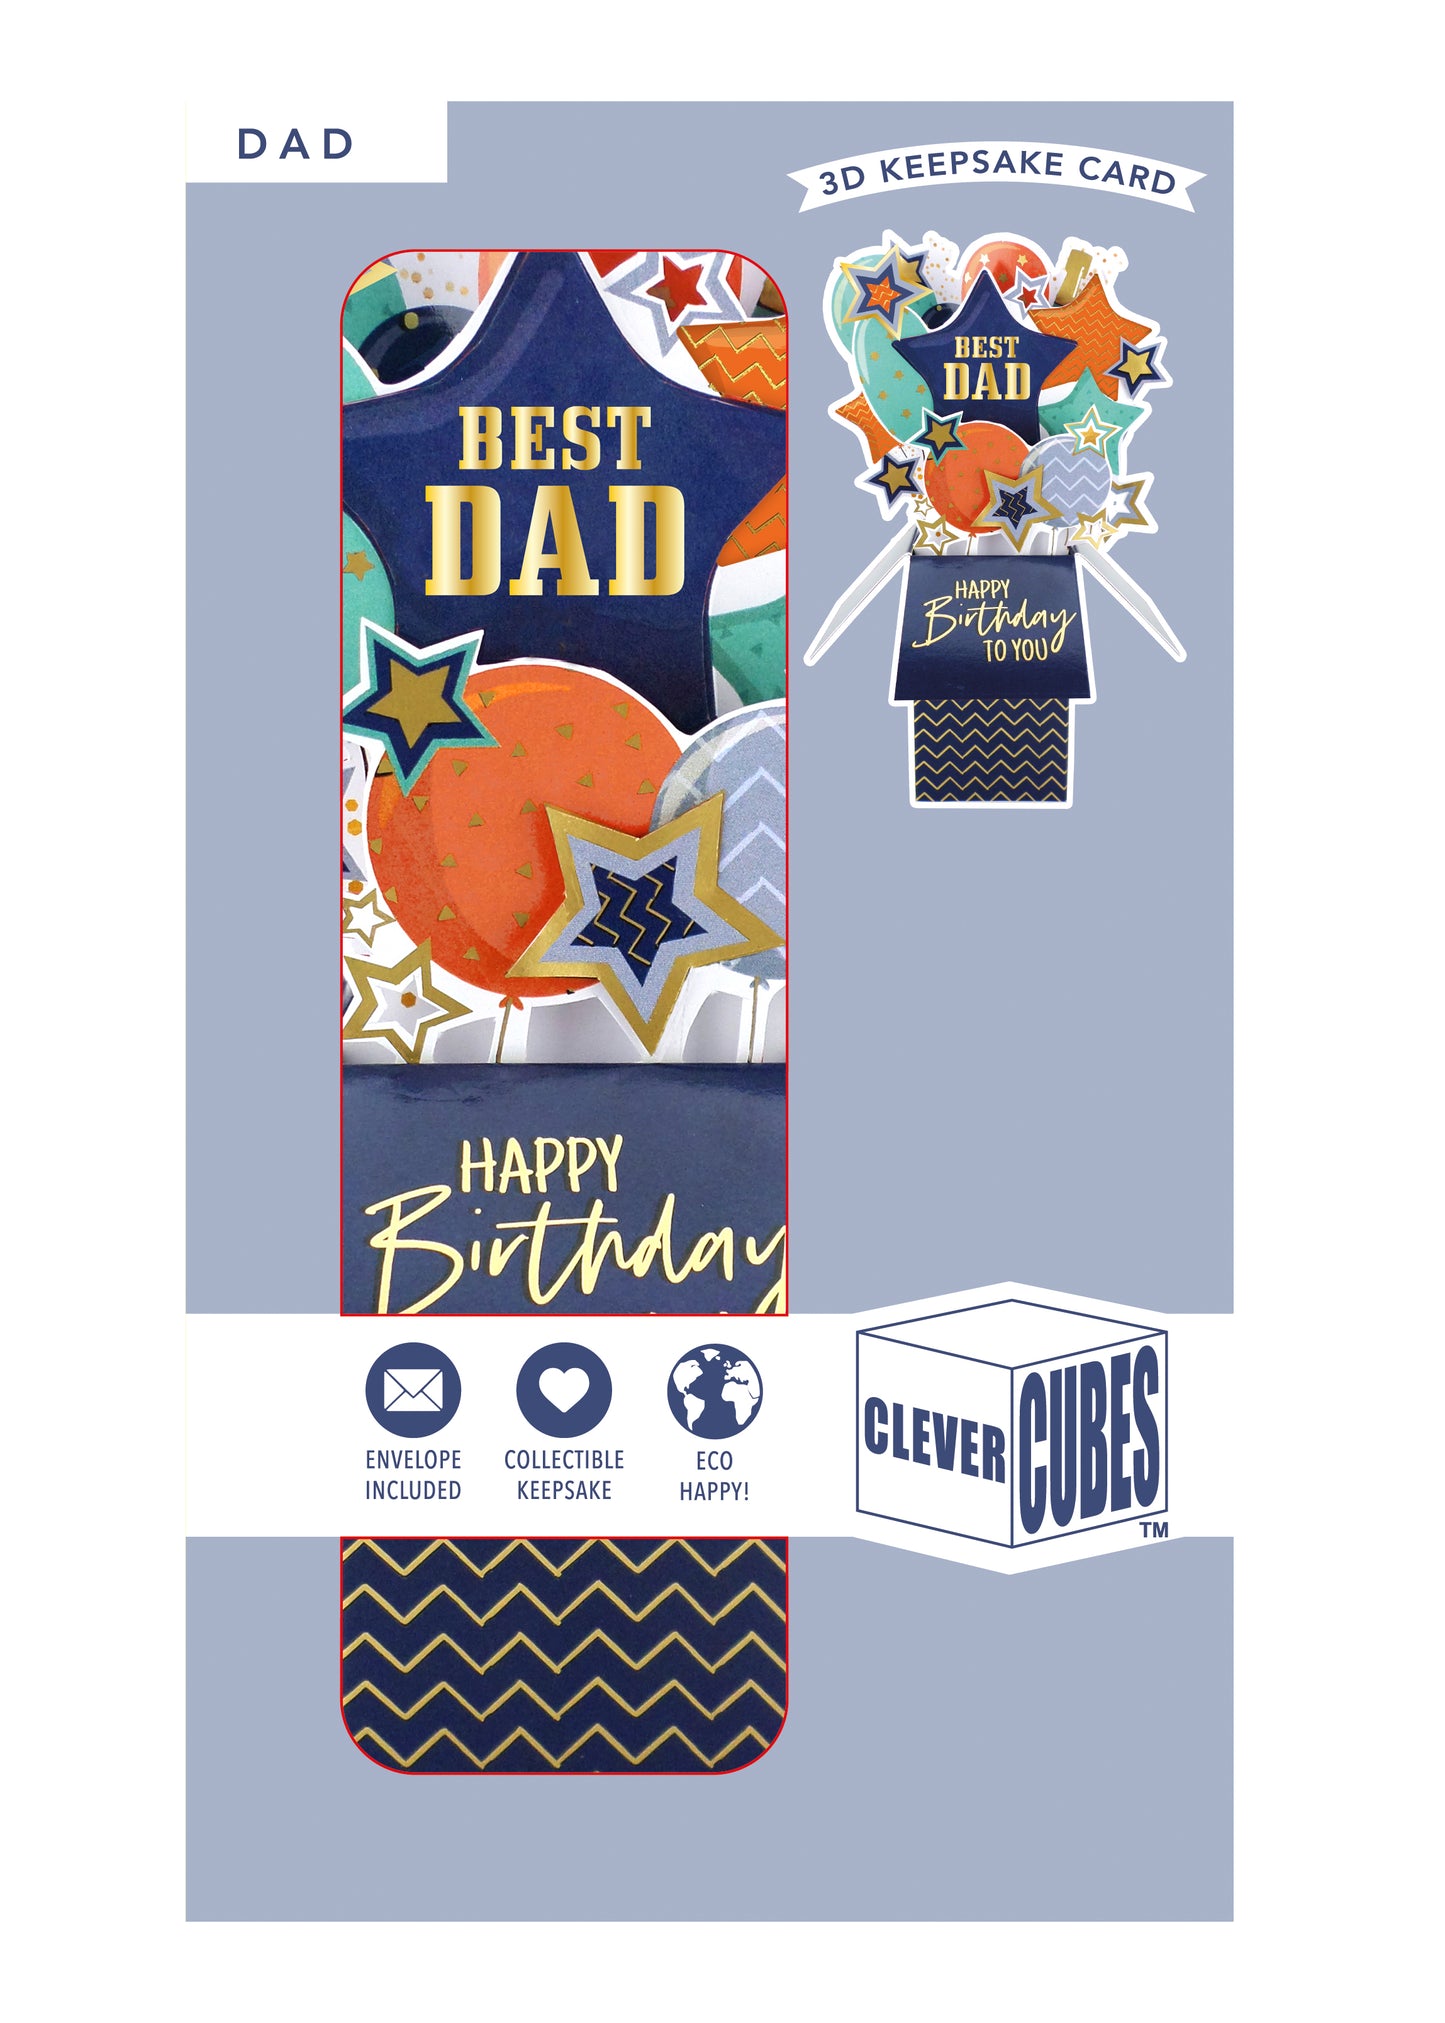 Clever Cube Best Dad Dad-Tastic Party! Birthday Pop Up Greeting Card